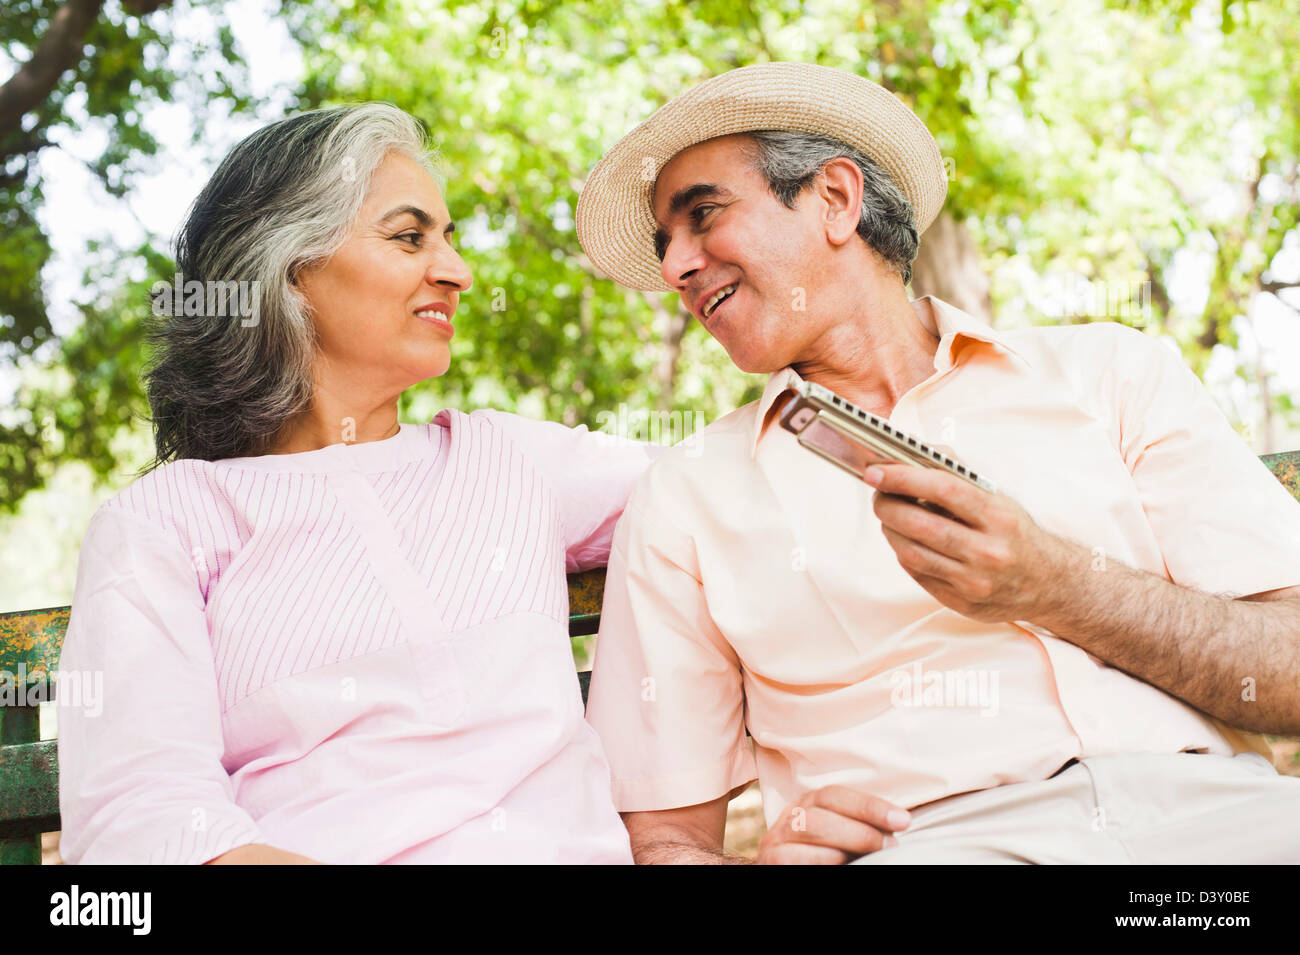 Man playing a harmonica with his wife sitting beside him and smiling, Lodi Gardens, New Delhi, India Stock Photo